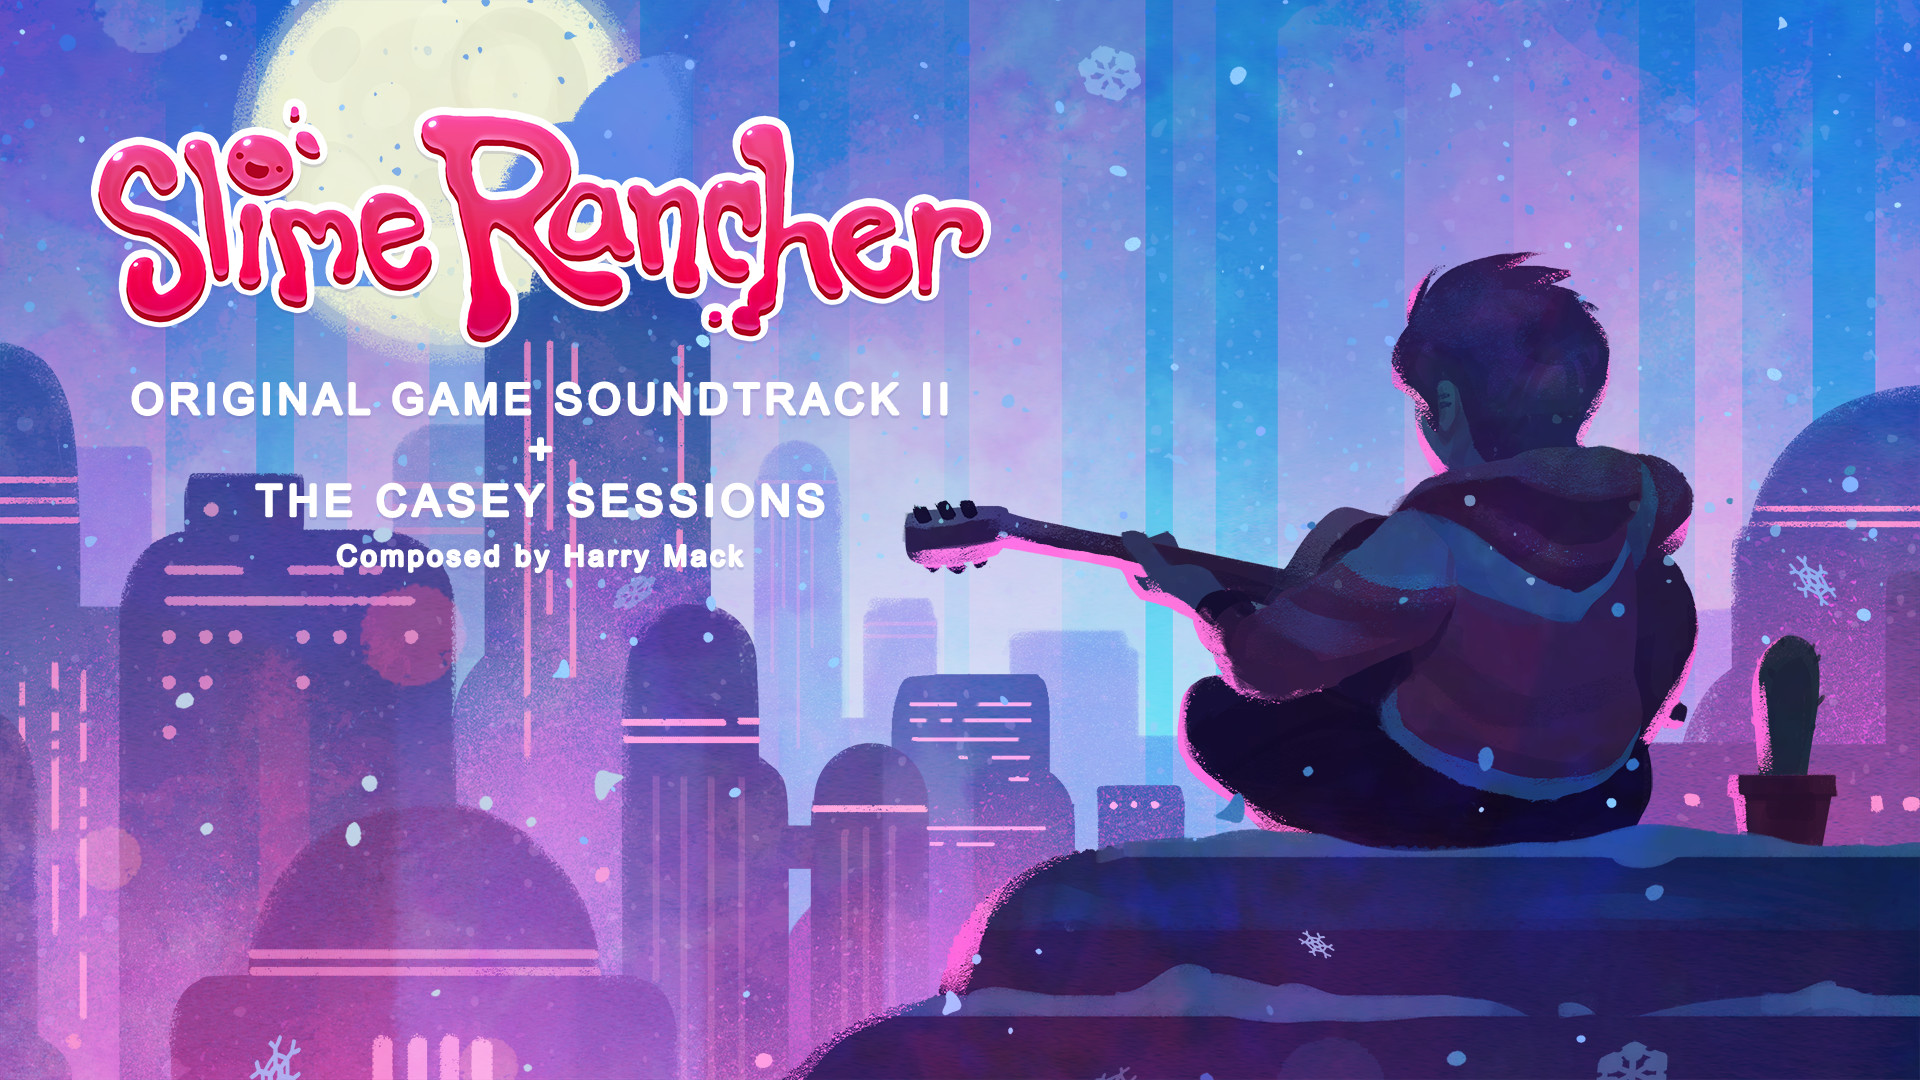 Slime Rancher: Original Soundtrack II + The Casey Sessions Featured Screenshot #1